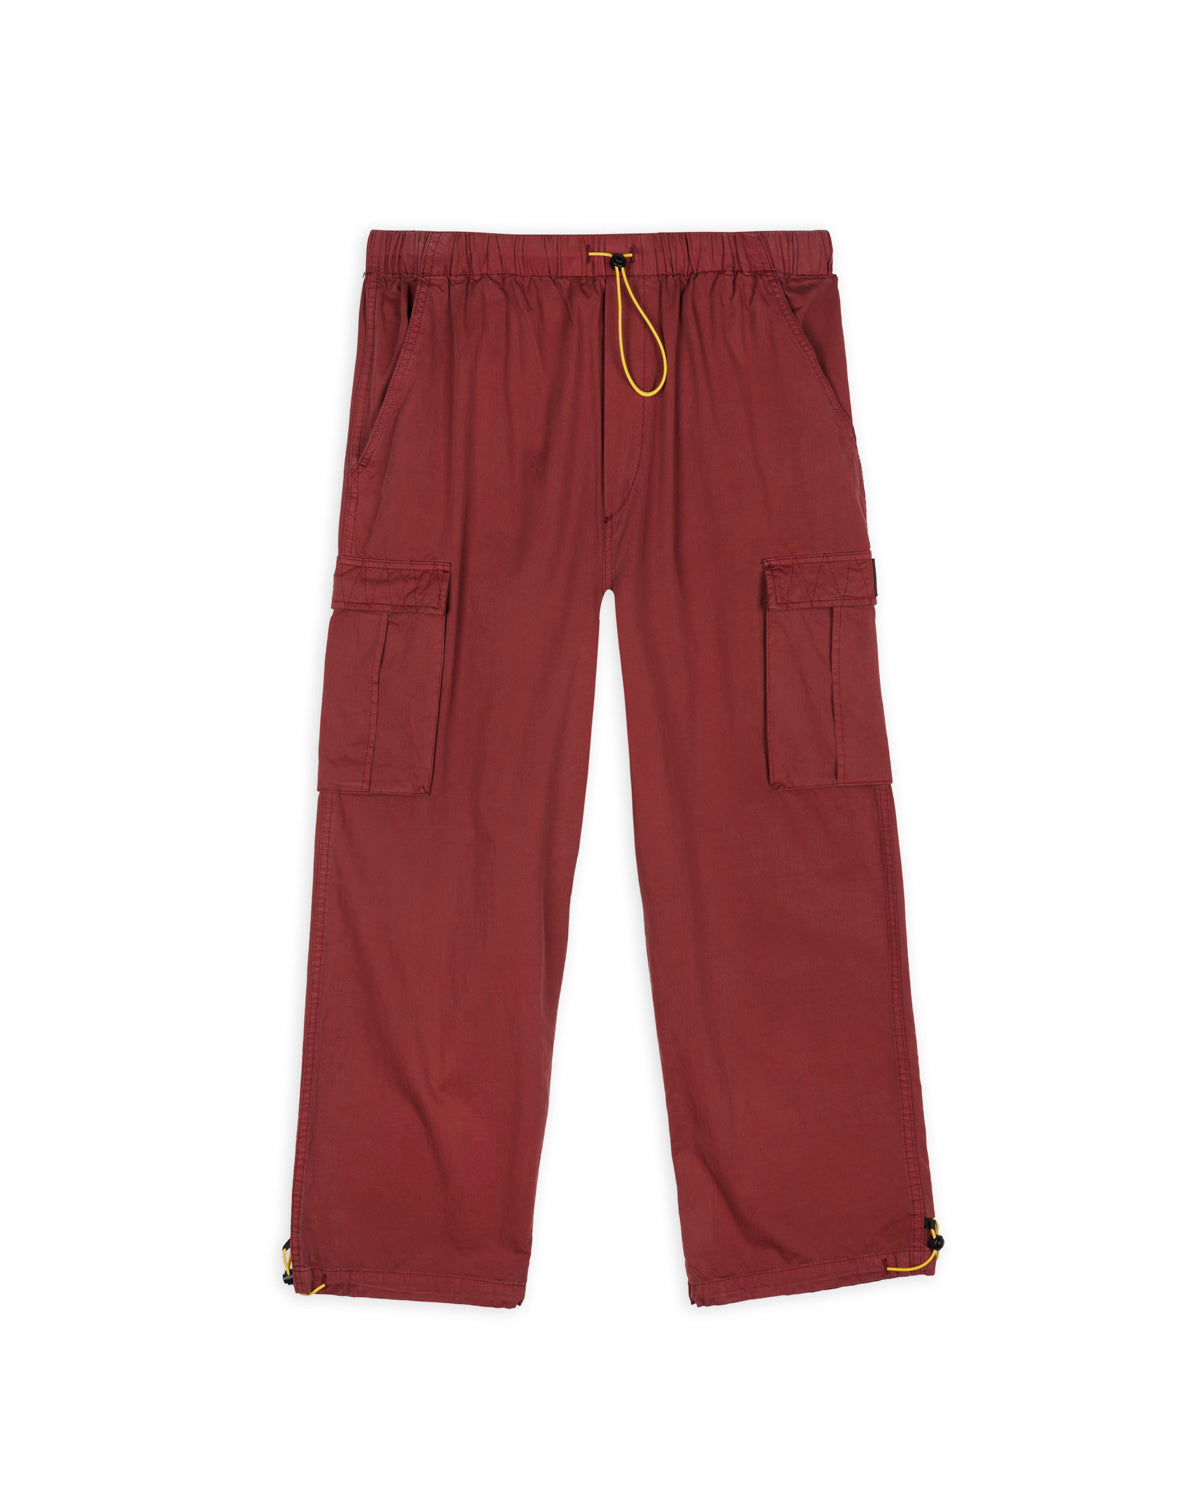 Flight Pant - Washed Red 1